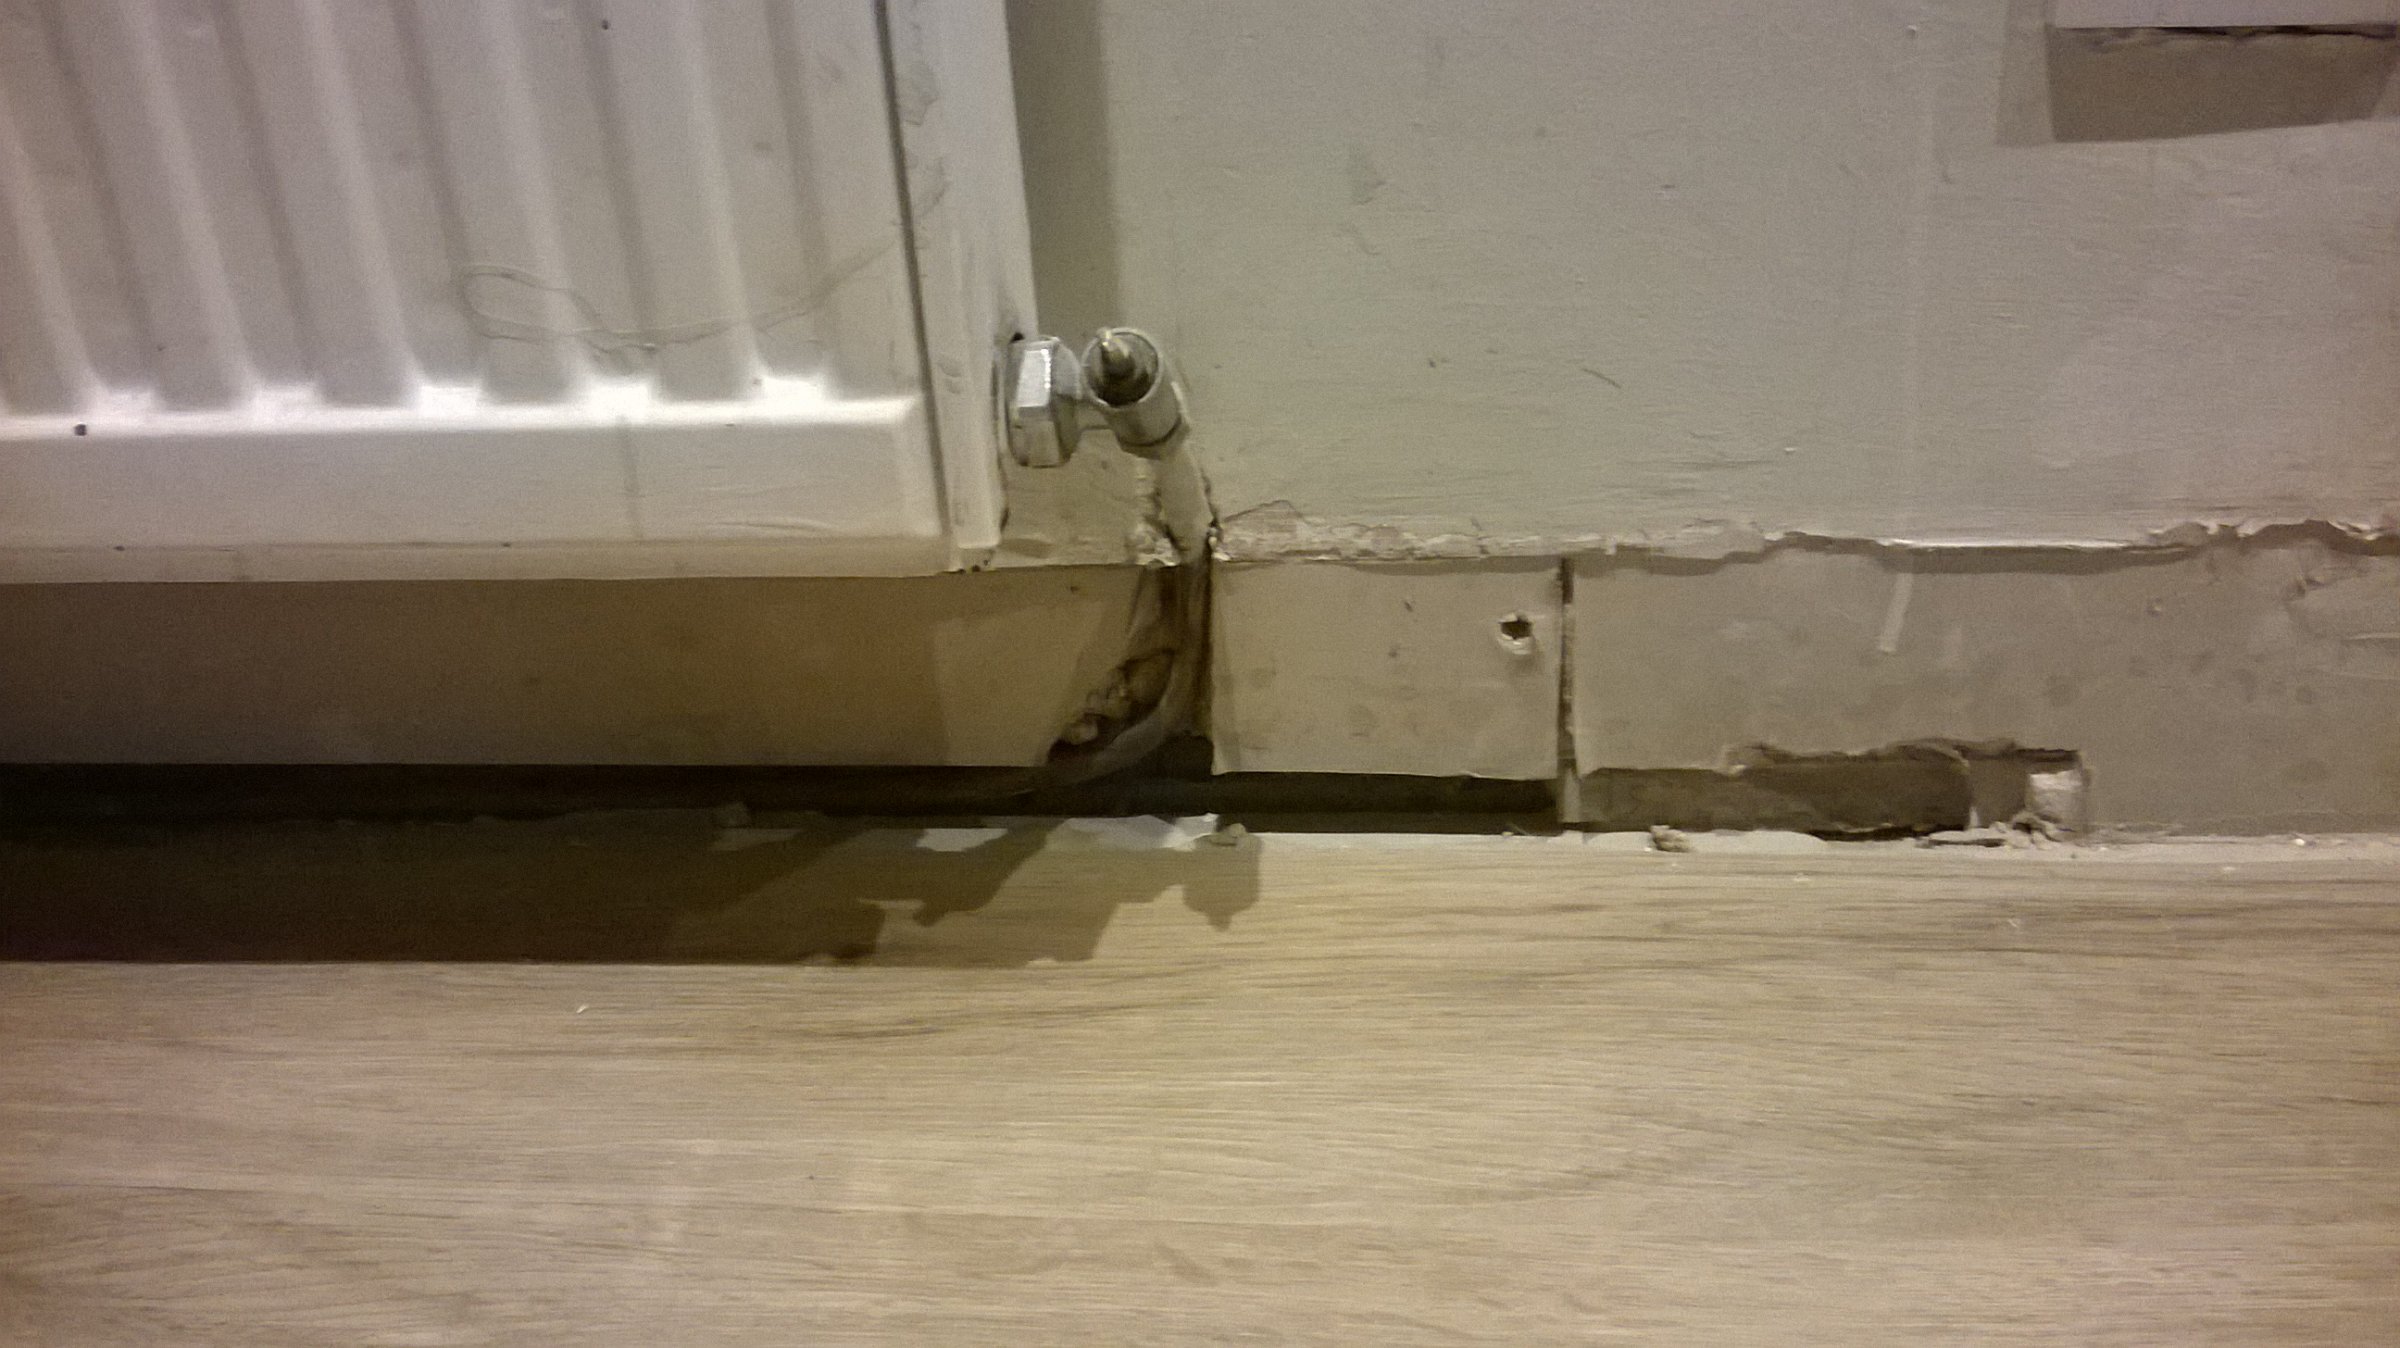 Beautify Radiator Pipes Diynot Forums, How To Cut Skirting Board Around Radiator Pipes